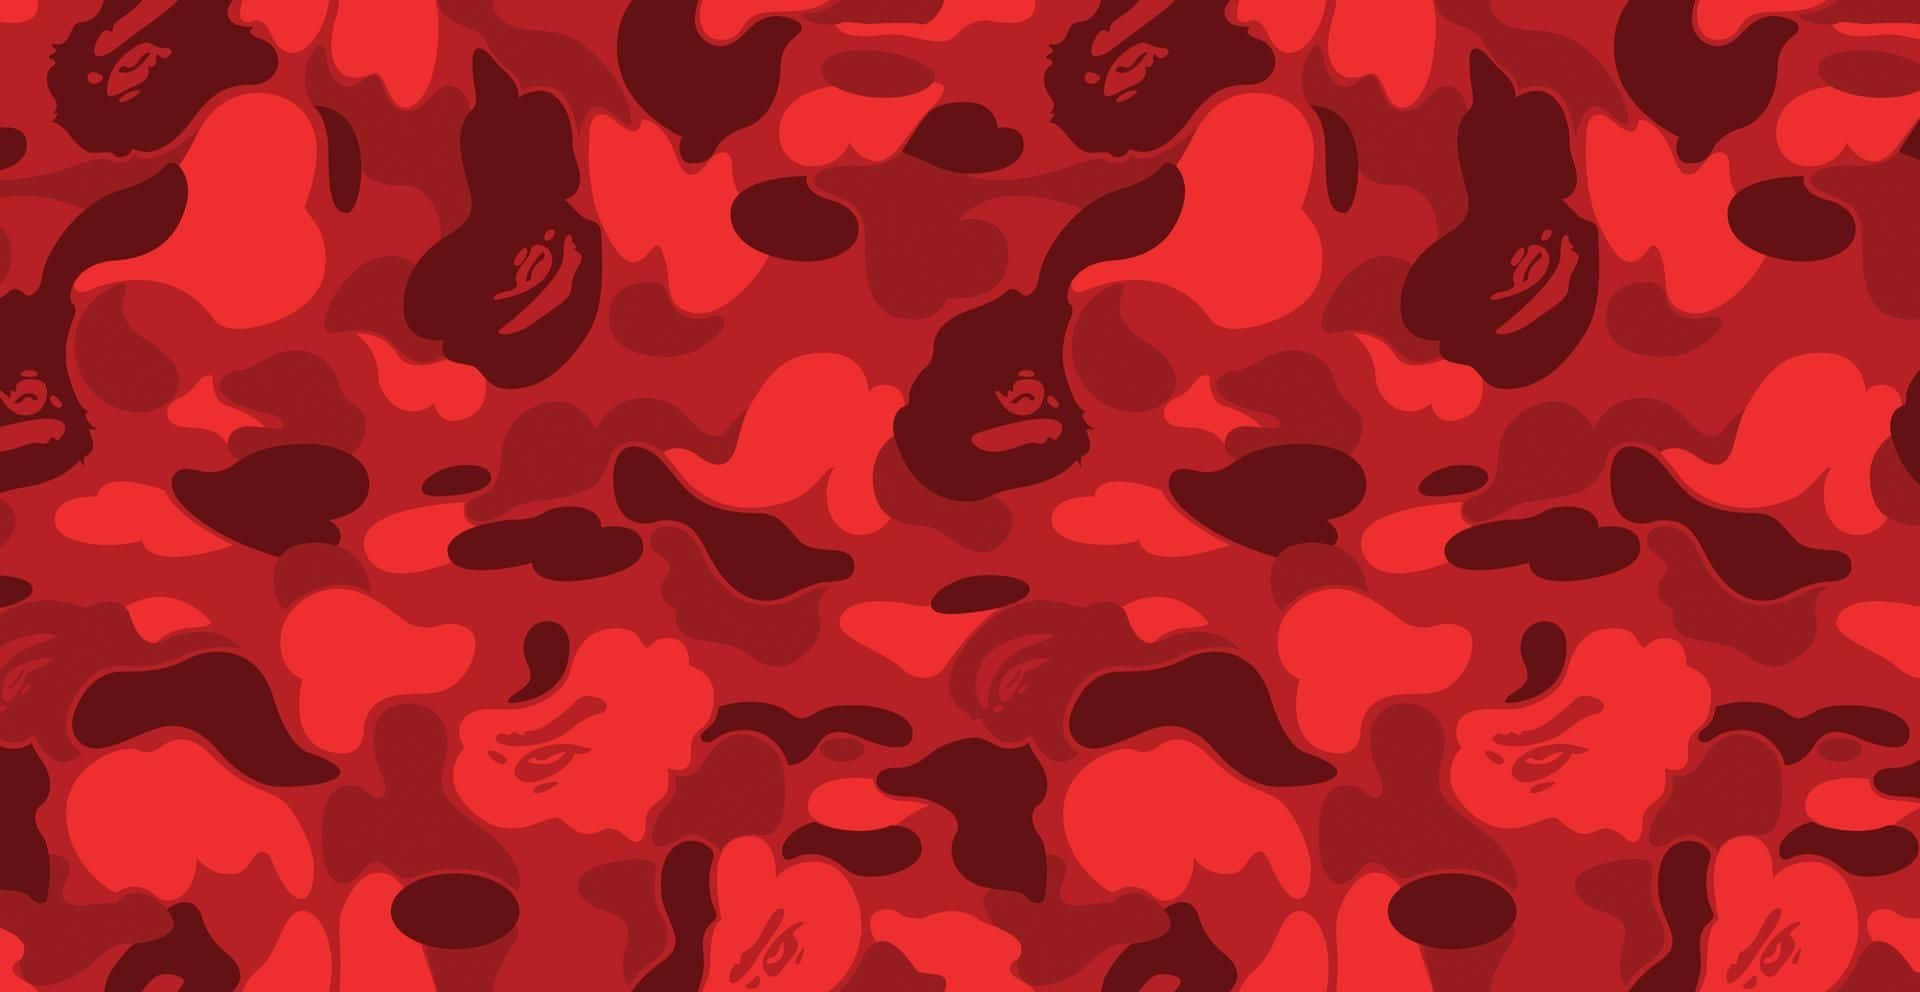 Represent your individual style with Red Bape Wallpaper